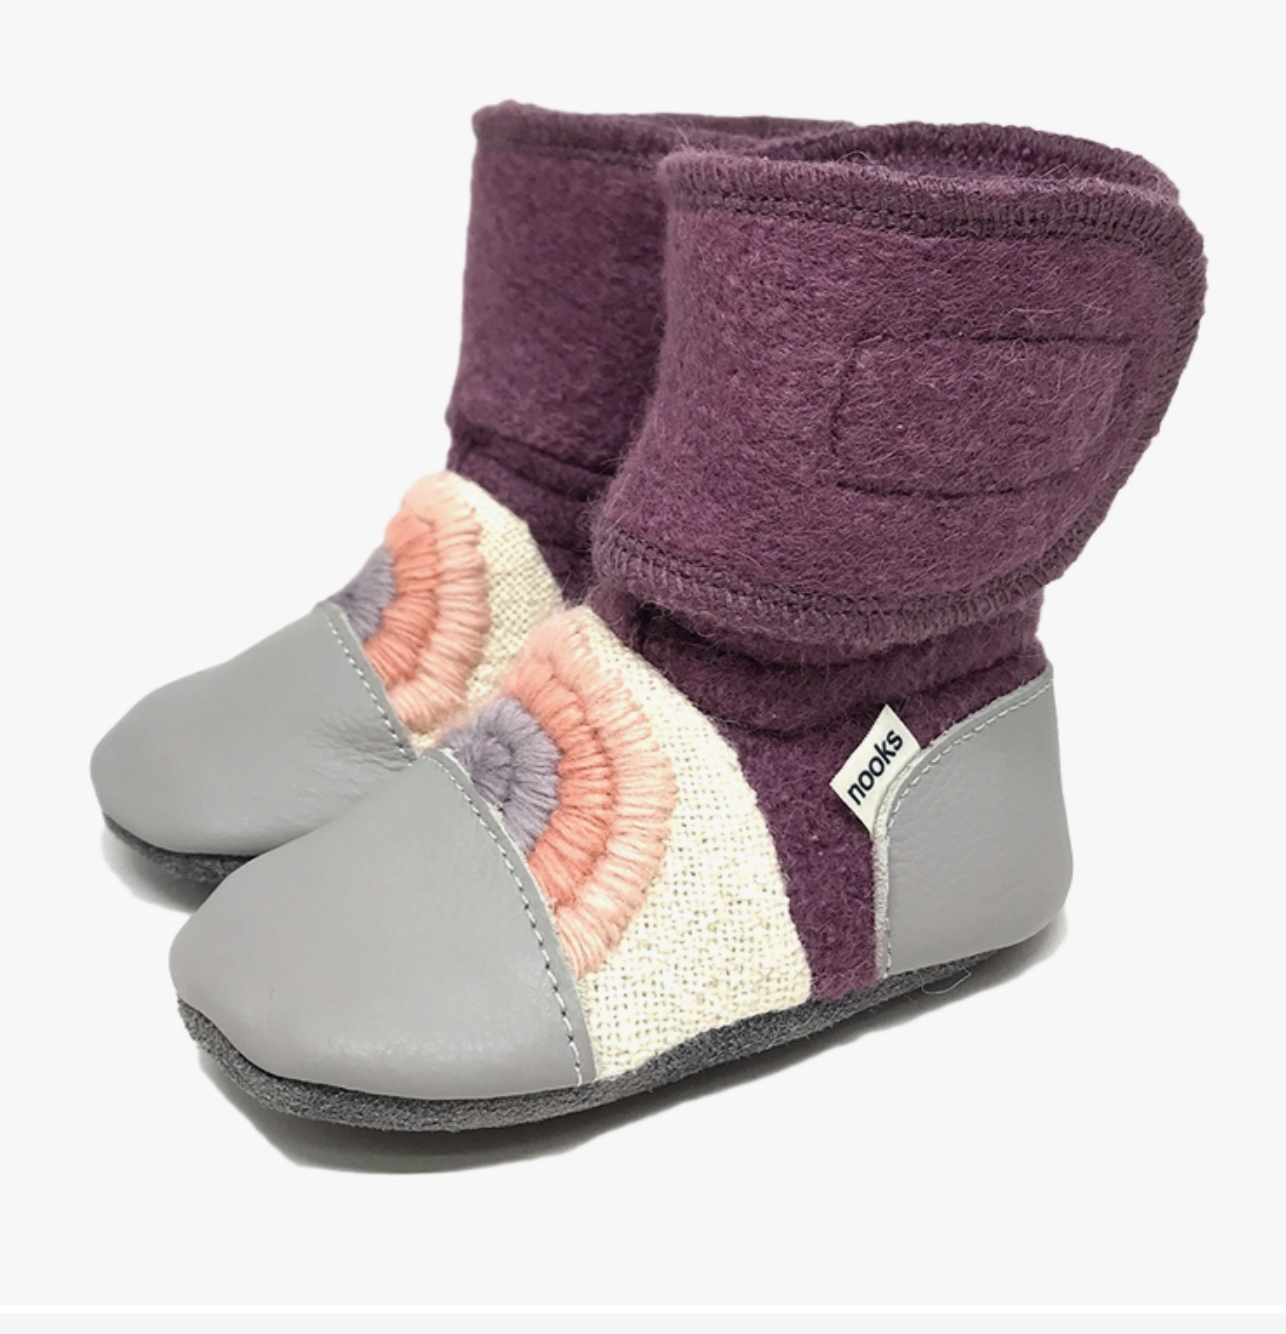 Dream On Embroidered Felted Wool Booties | Nooks